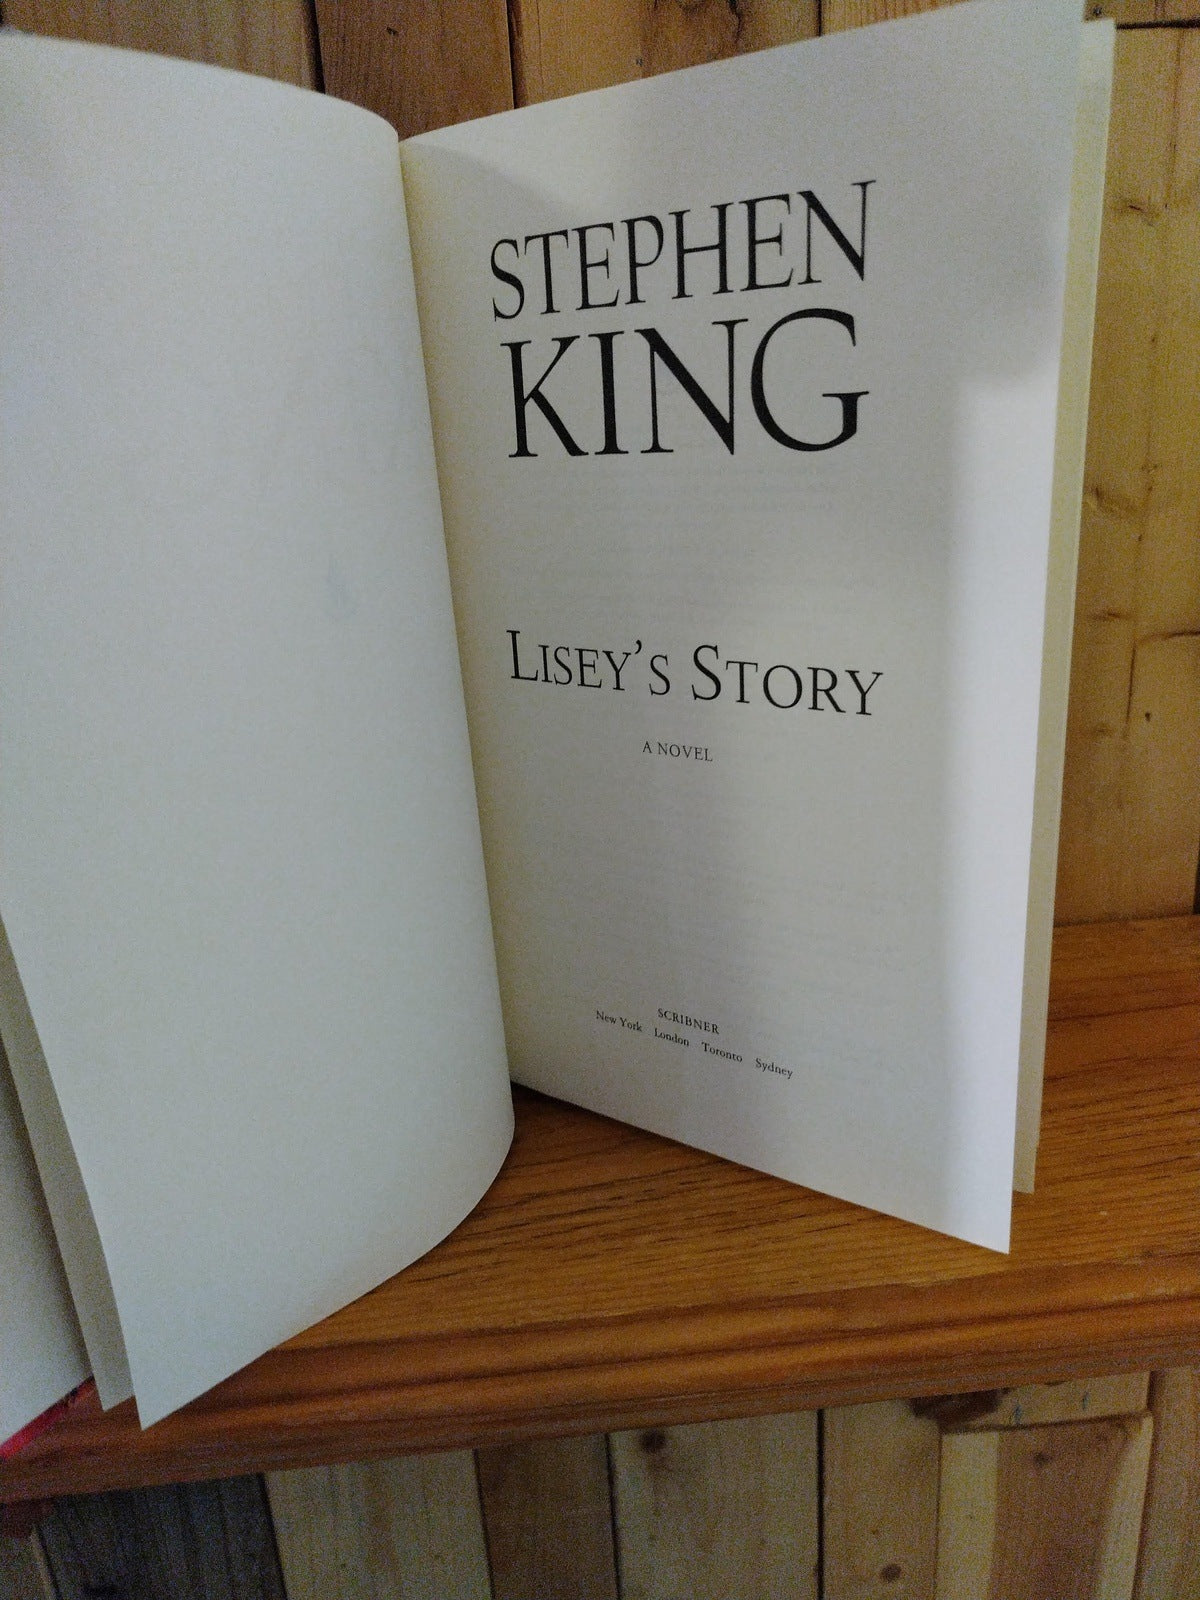 Stephen King Lisey's Story First Edition Hardcover No Dust Jacket Good Condition 781321